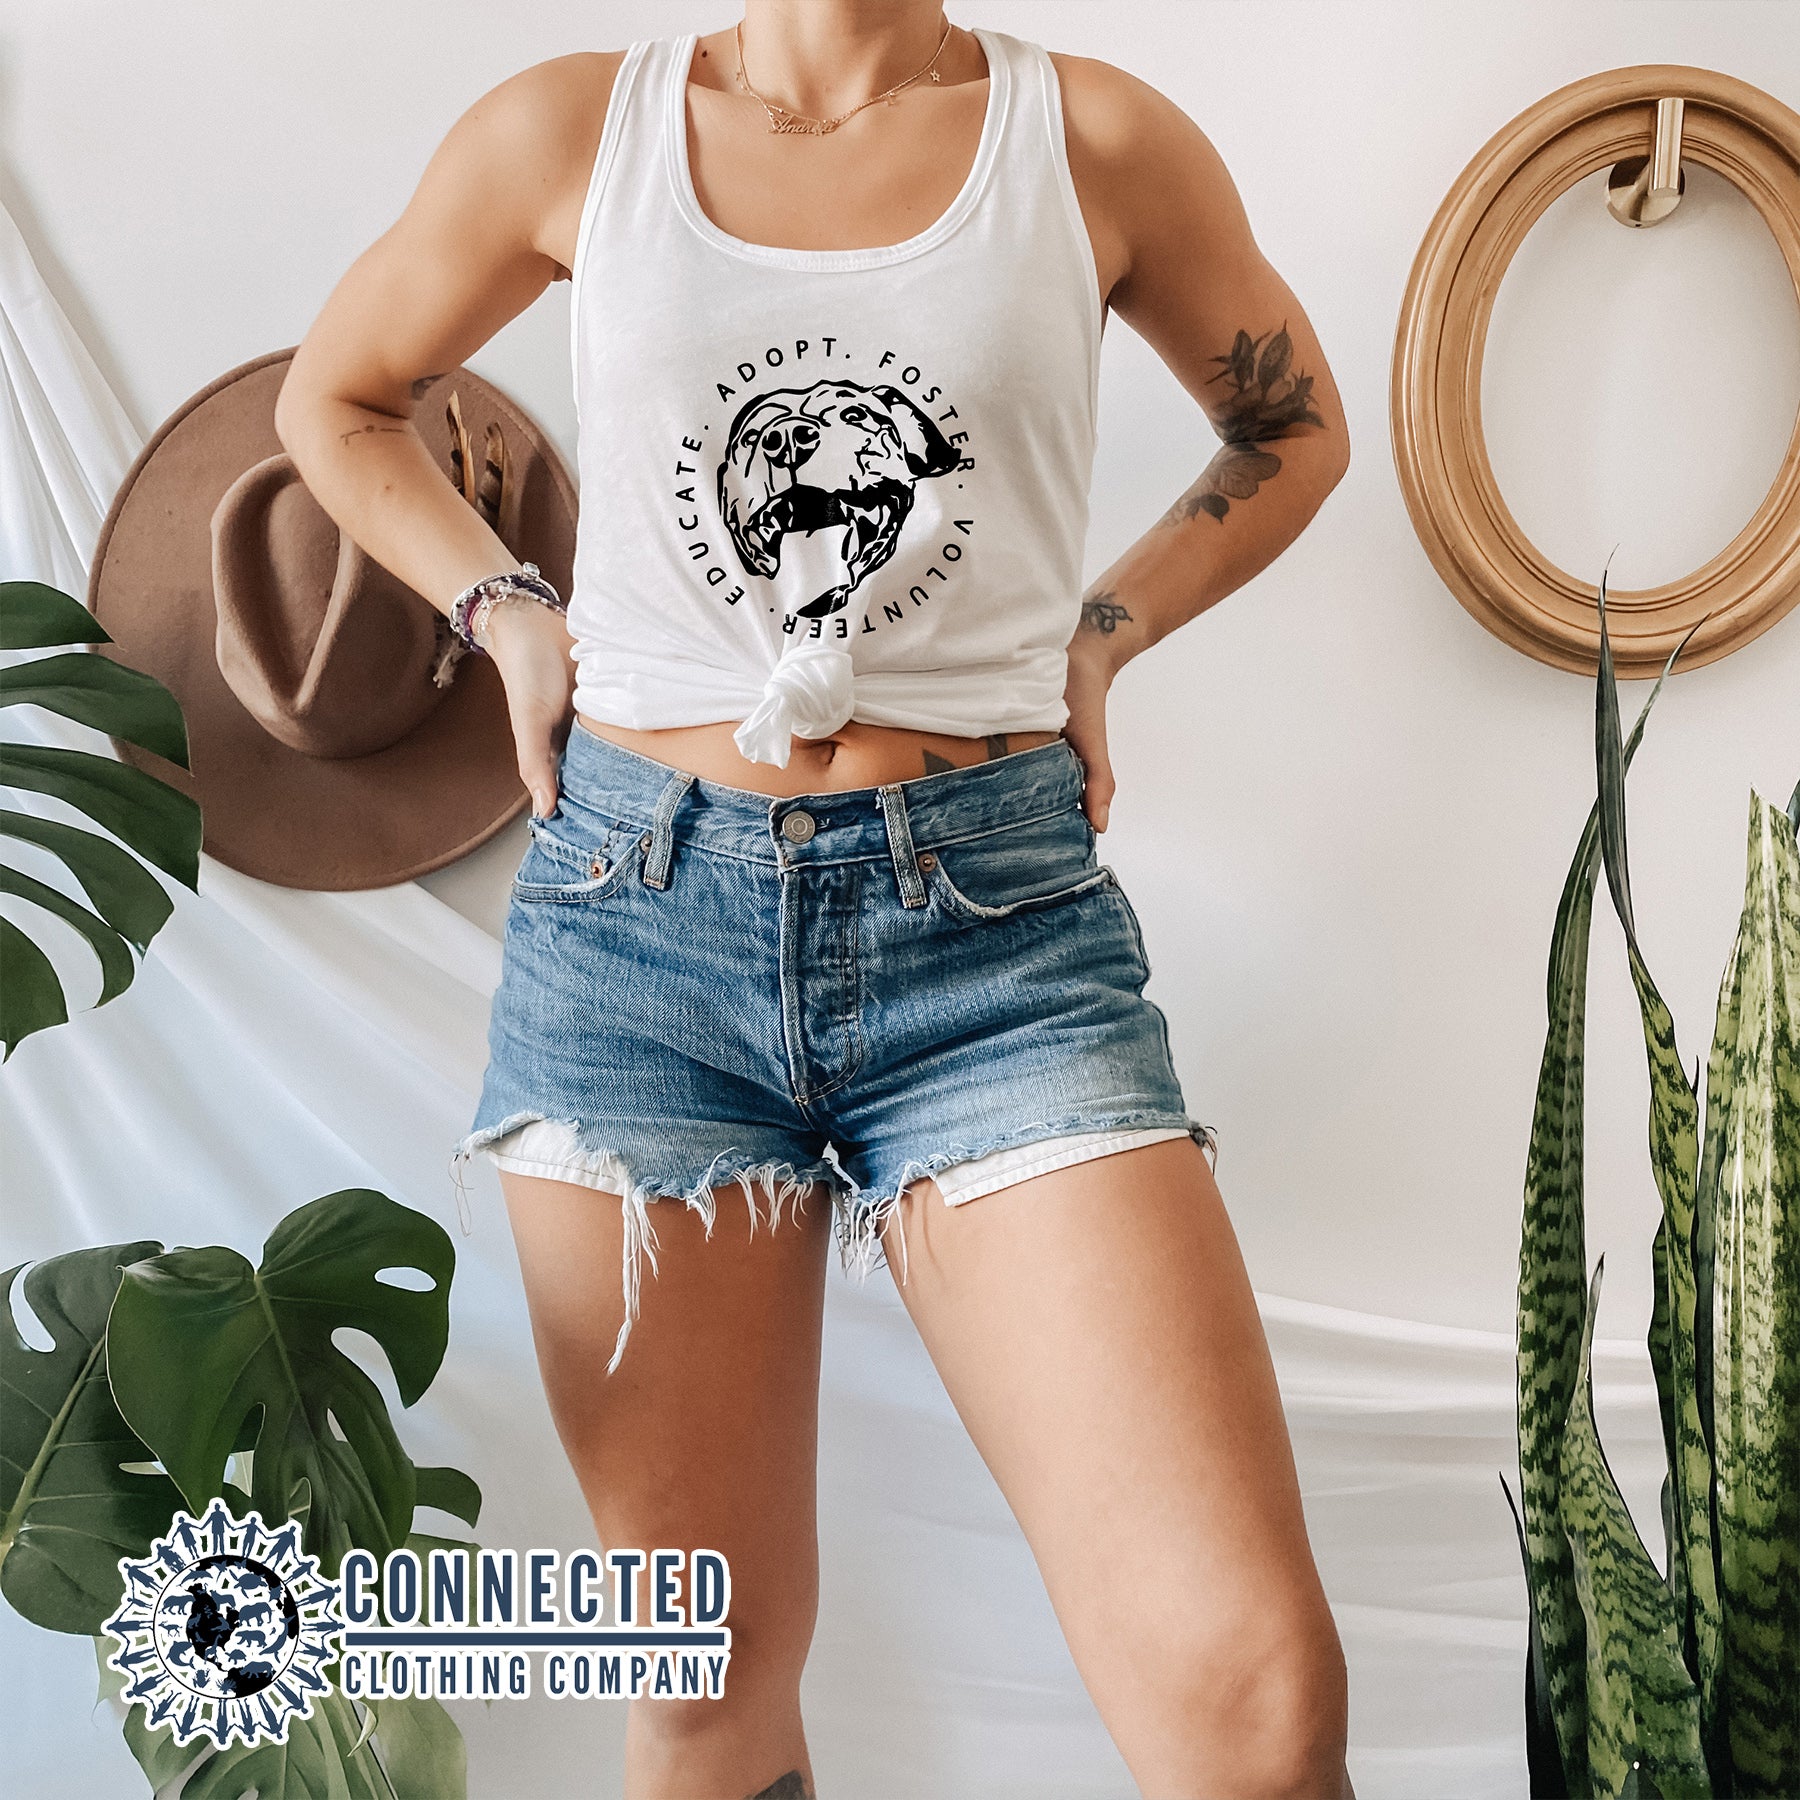 Model Wearing White Respect Foster Volunteer Educate Women's Tank Top - Connected Clothing Company - Ethically and Sustainably Made - 10% of profits donated to the SPCA animal rescue humane society